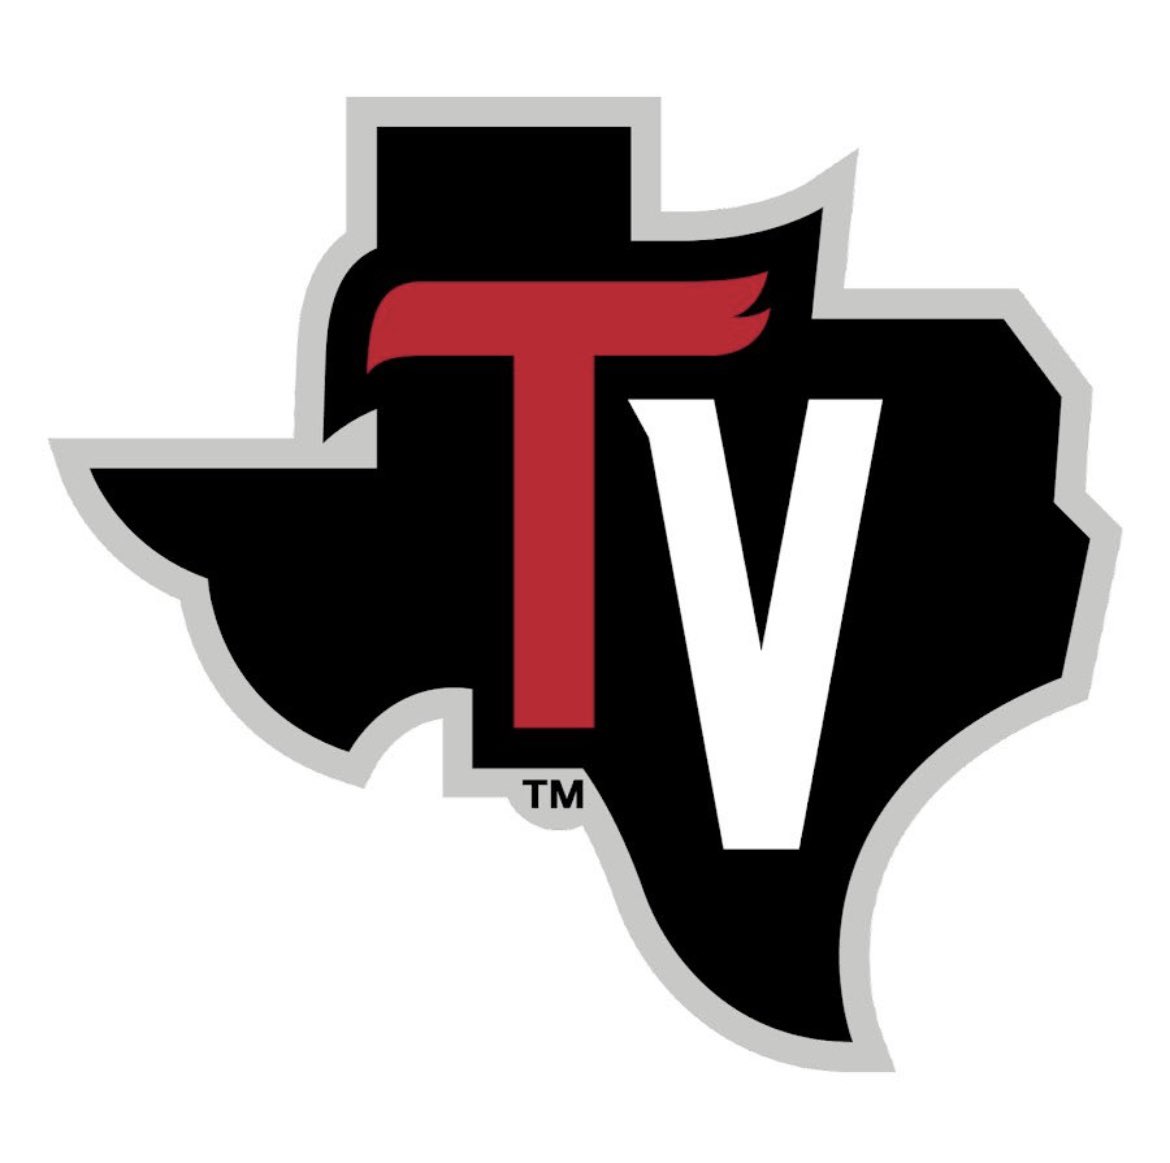 I am excited and grateful to announce that I have joined the coaching staff at Trinity Valley! I would also like to thank Coach Heiar for this opportunity! @THEVALLEYMBB @CoachGreGHeiar